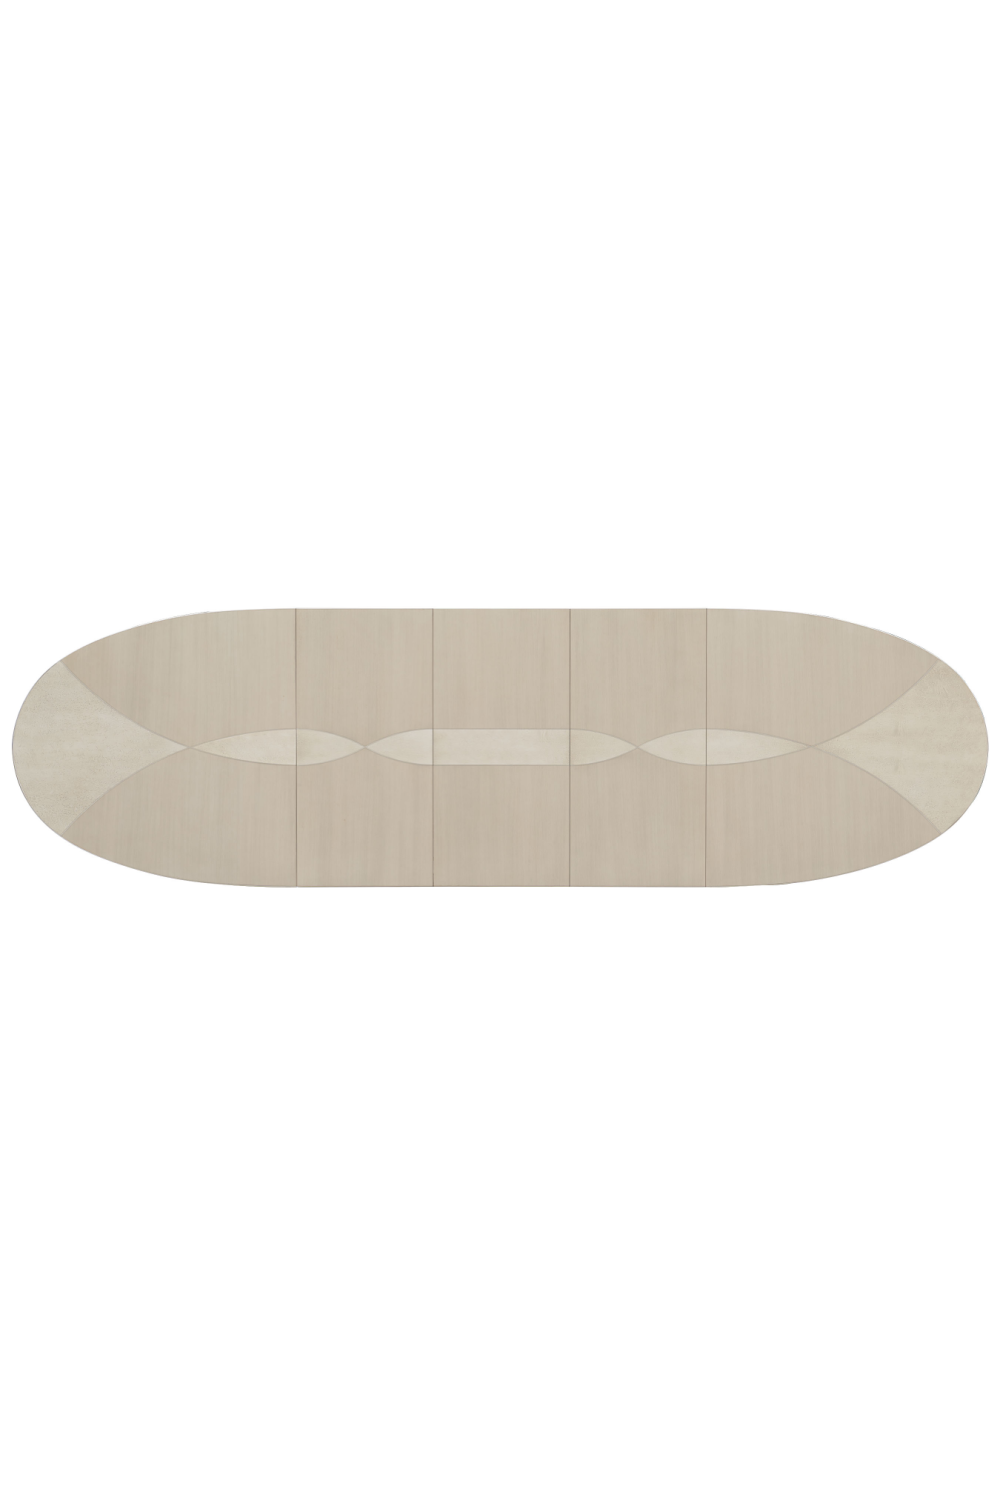 Oval Silver Dining Table | Caracole The Source | Oroa.com